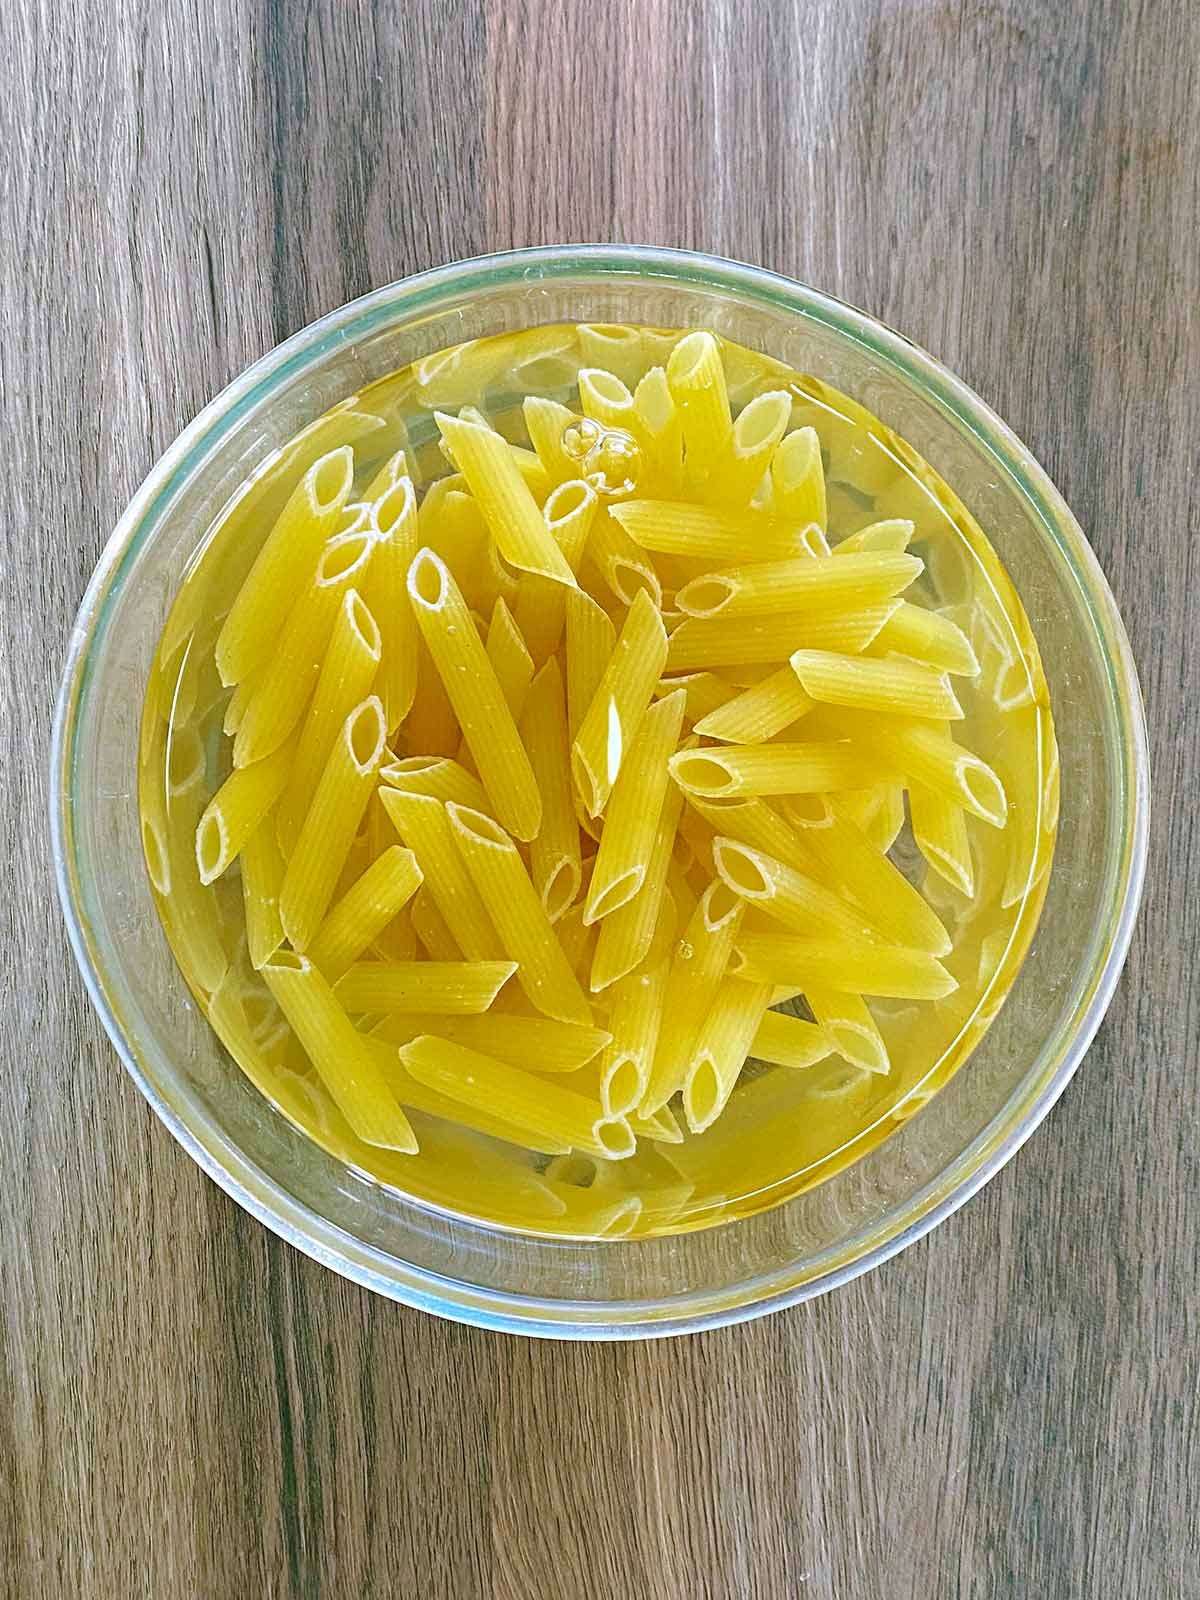 Uncooked pasta in a glass bowl covered in water.